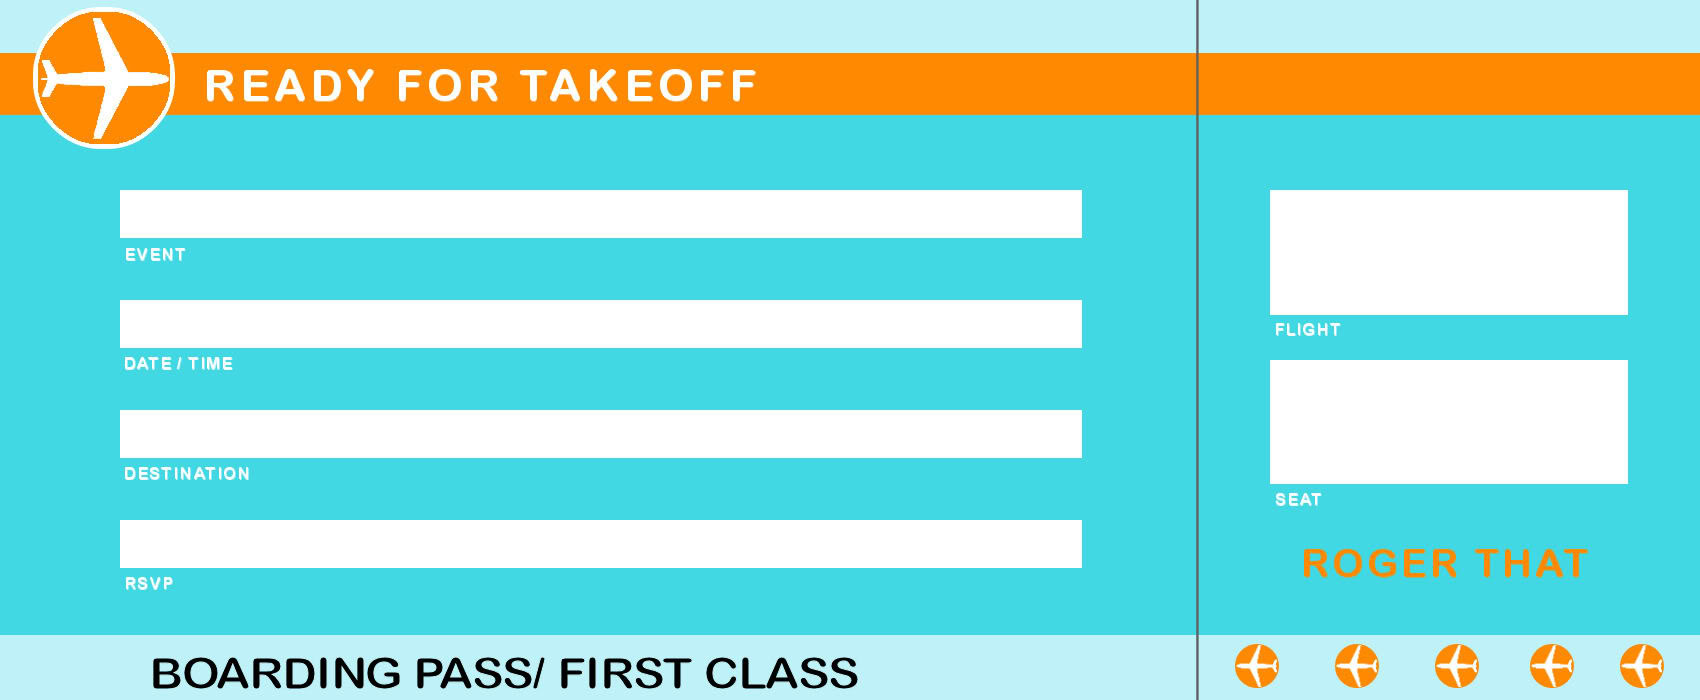 Free printable airline ticket templates